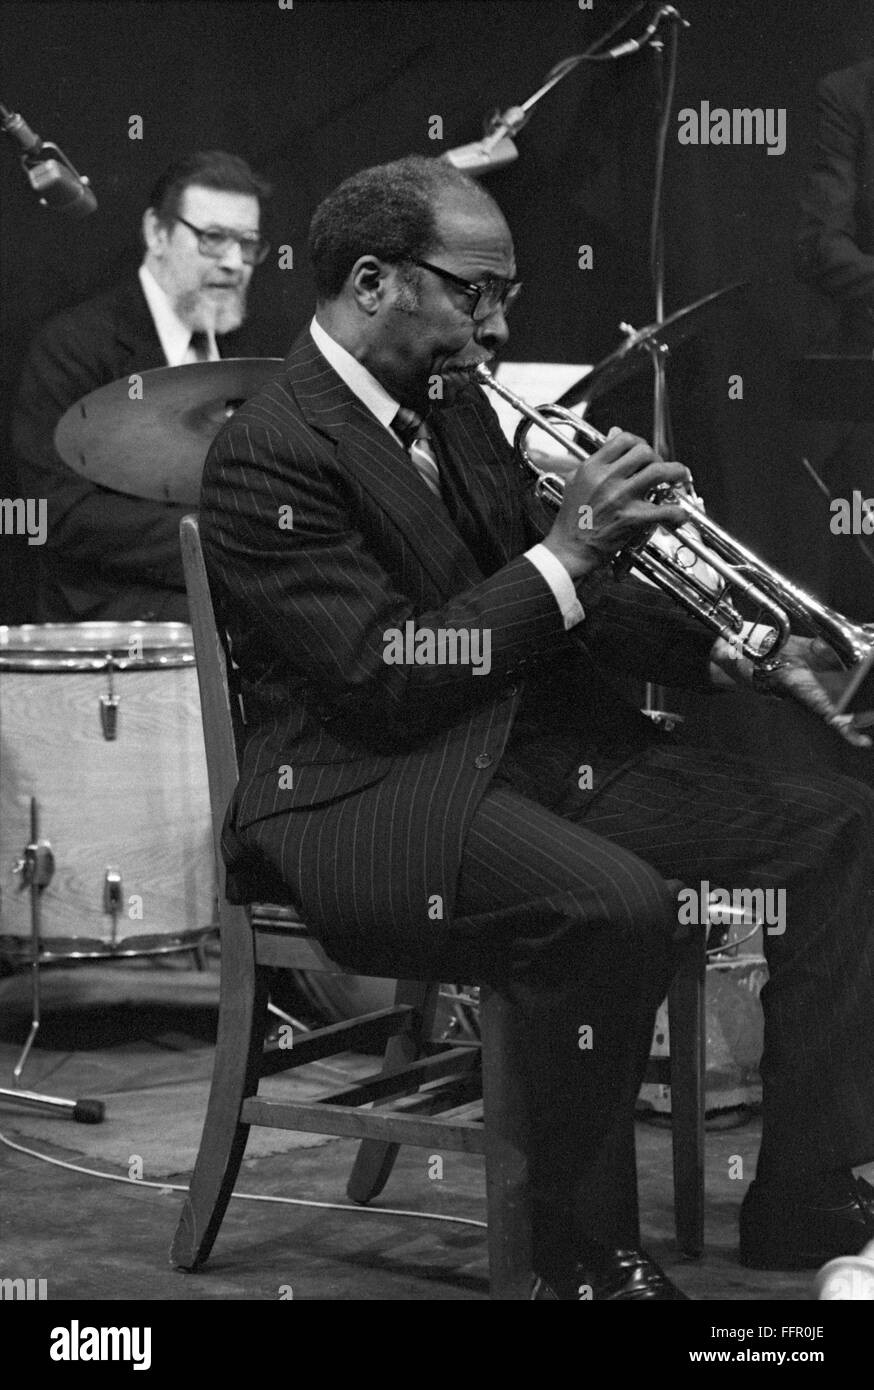 Jazz musicians Joe Wilder and Vernel Fourtier at a session arranged by Loren Schoenberg in New York City. The concert was January 20, 1985, at the Vineyard Theater in Manhattan. Stock Photo